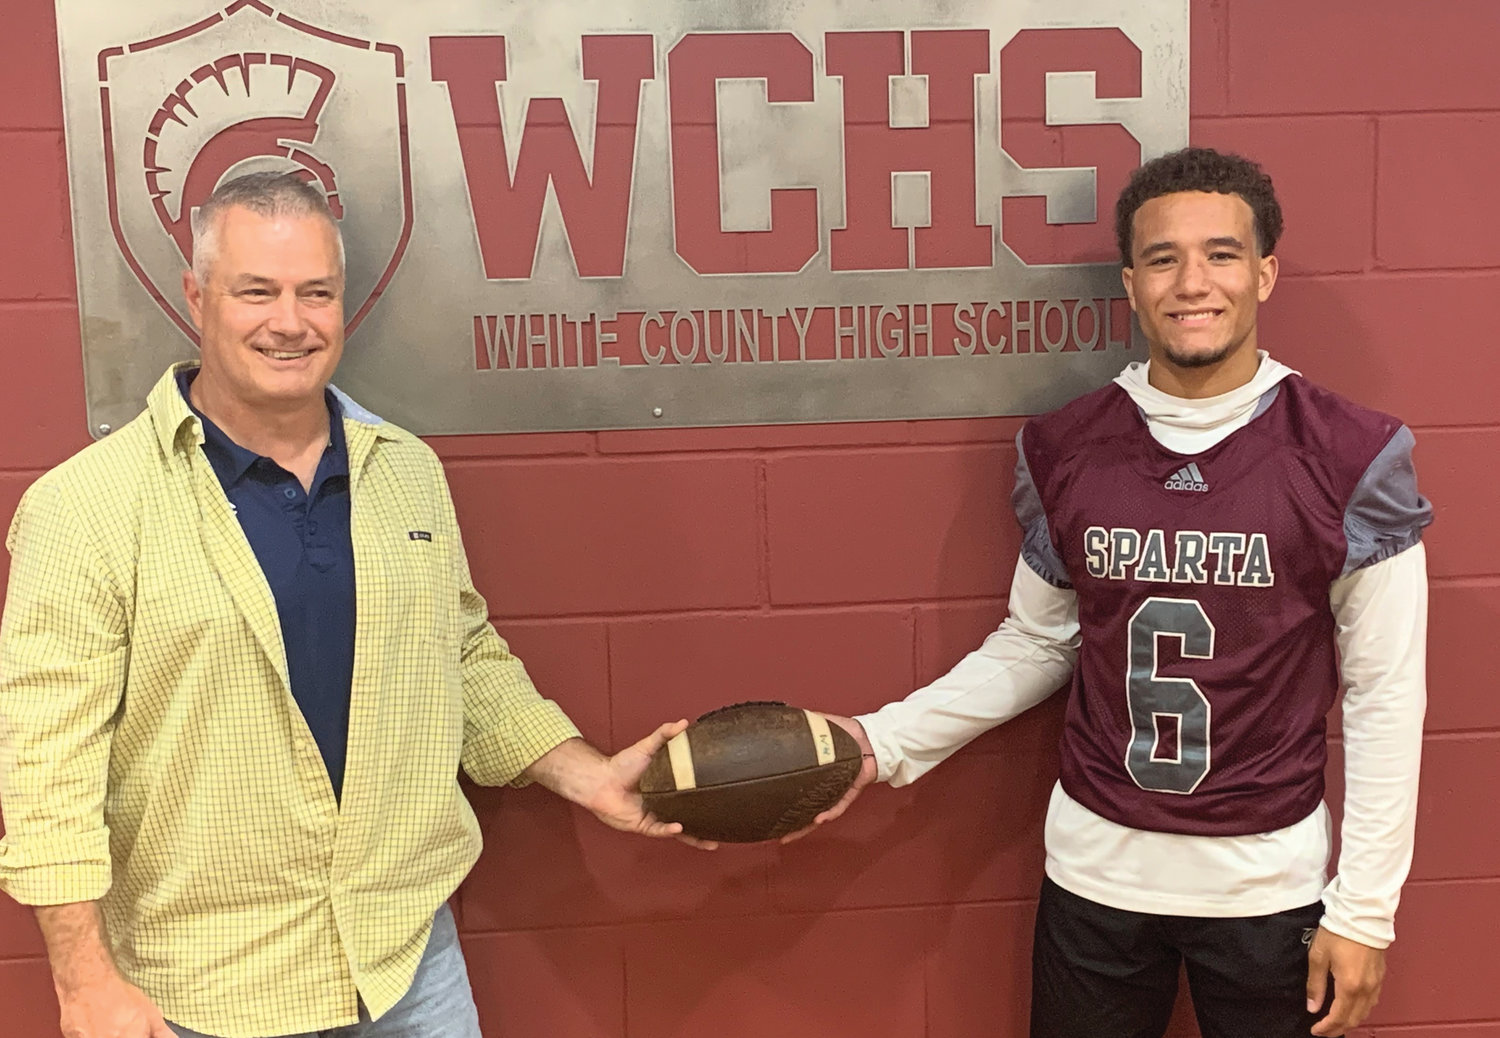 Former White County football Warrior Dewayne Marcus hands off the football to Malaki Dowell. Marcus had set the single season rushing record of 1,500 yards, in 1983. Dowell broke that record this past football season with a total of 2,029 yards.